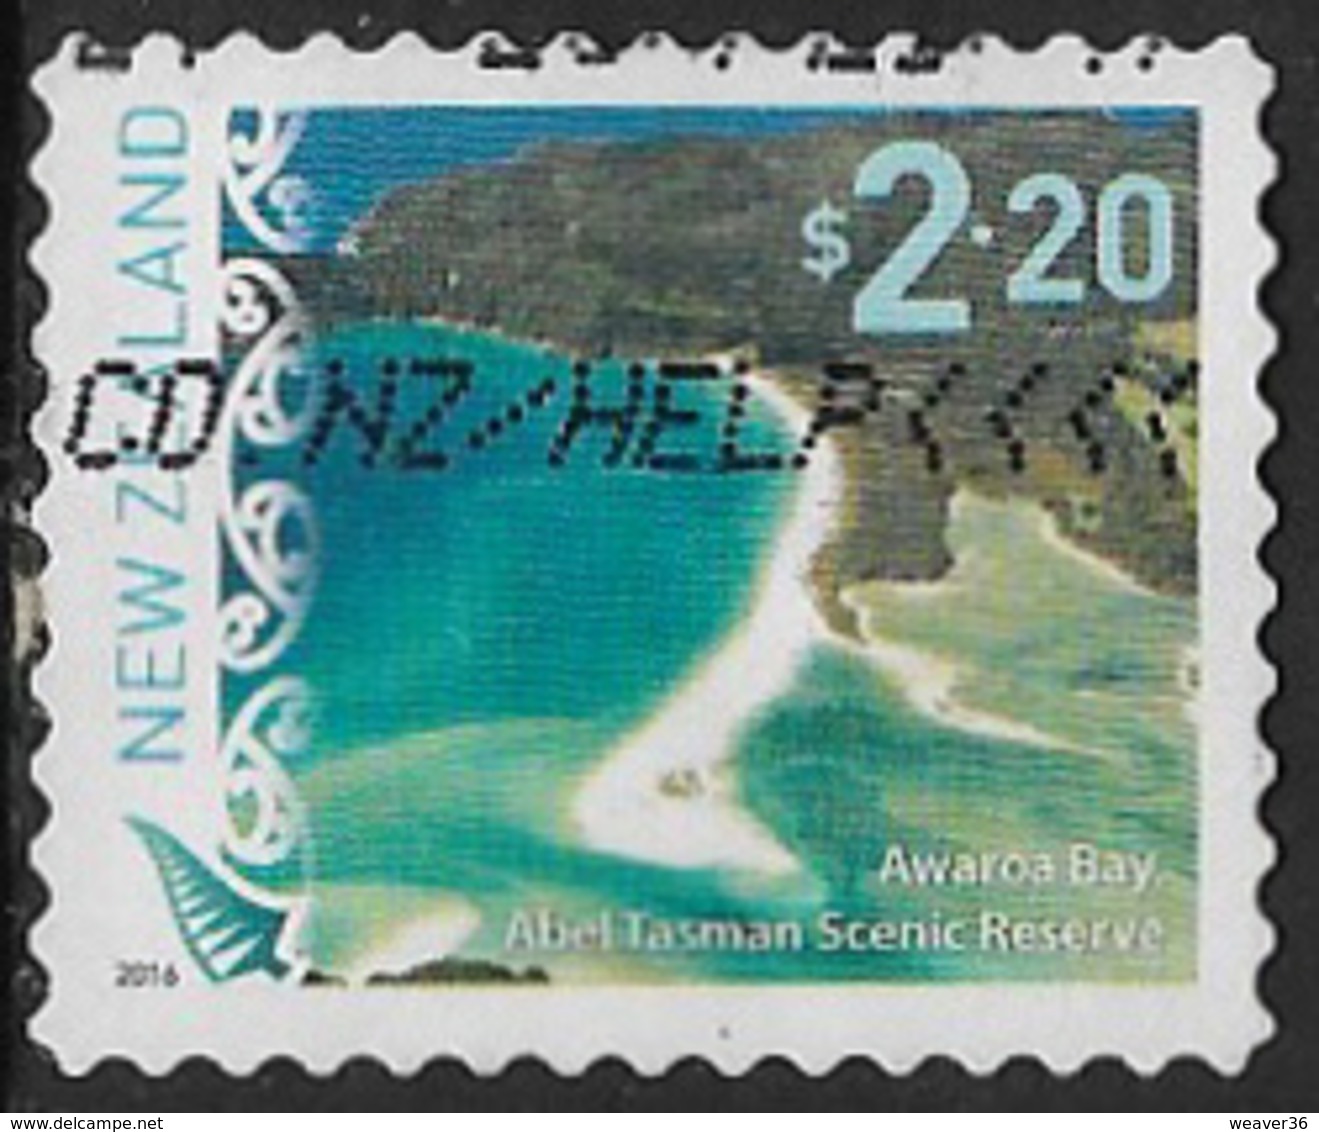 New Zealand 2016 Definitive $2.20 Self Adhesive Good/fine Used [39/32134/ND] - Used Stamps